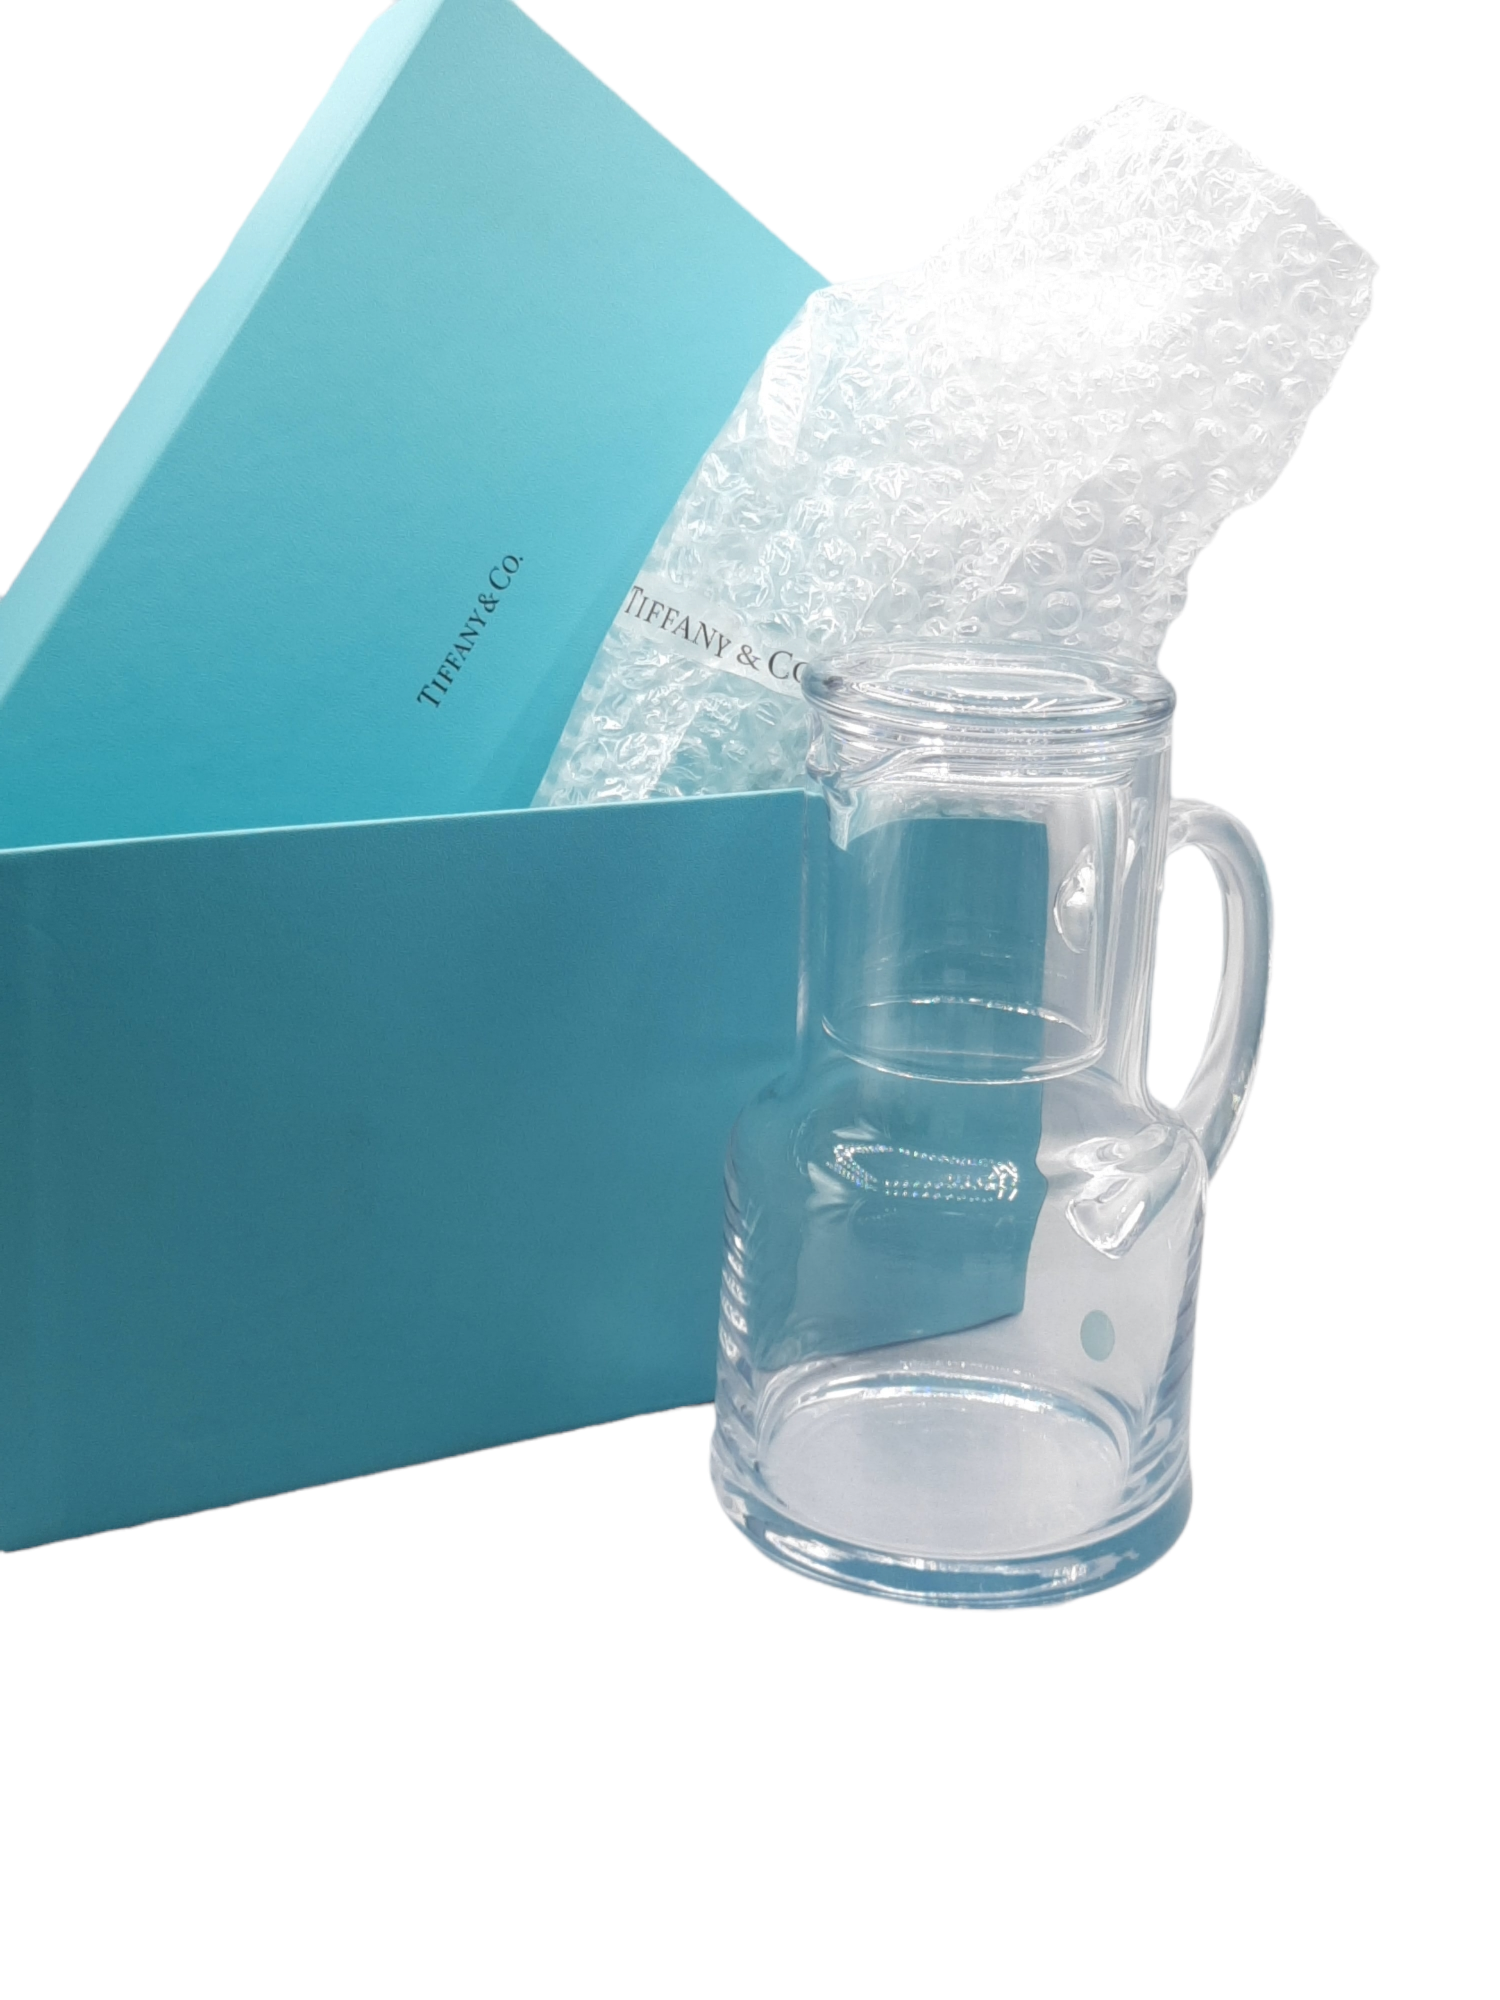 Tiffany & Co Crystal Glass Bedside Water Pitcher Carafe / with lid